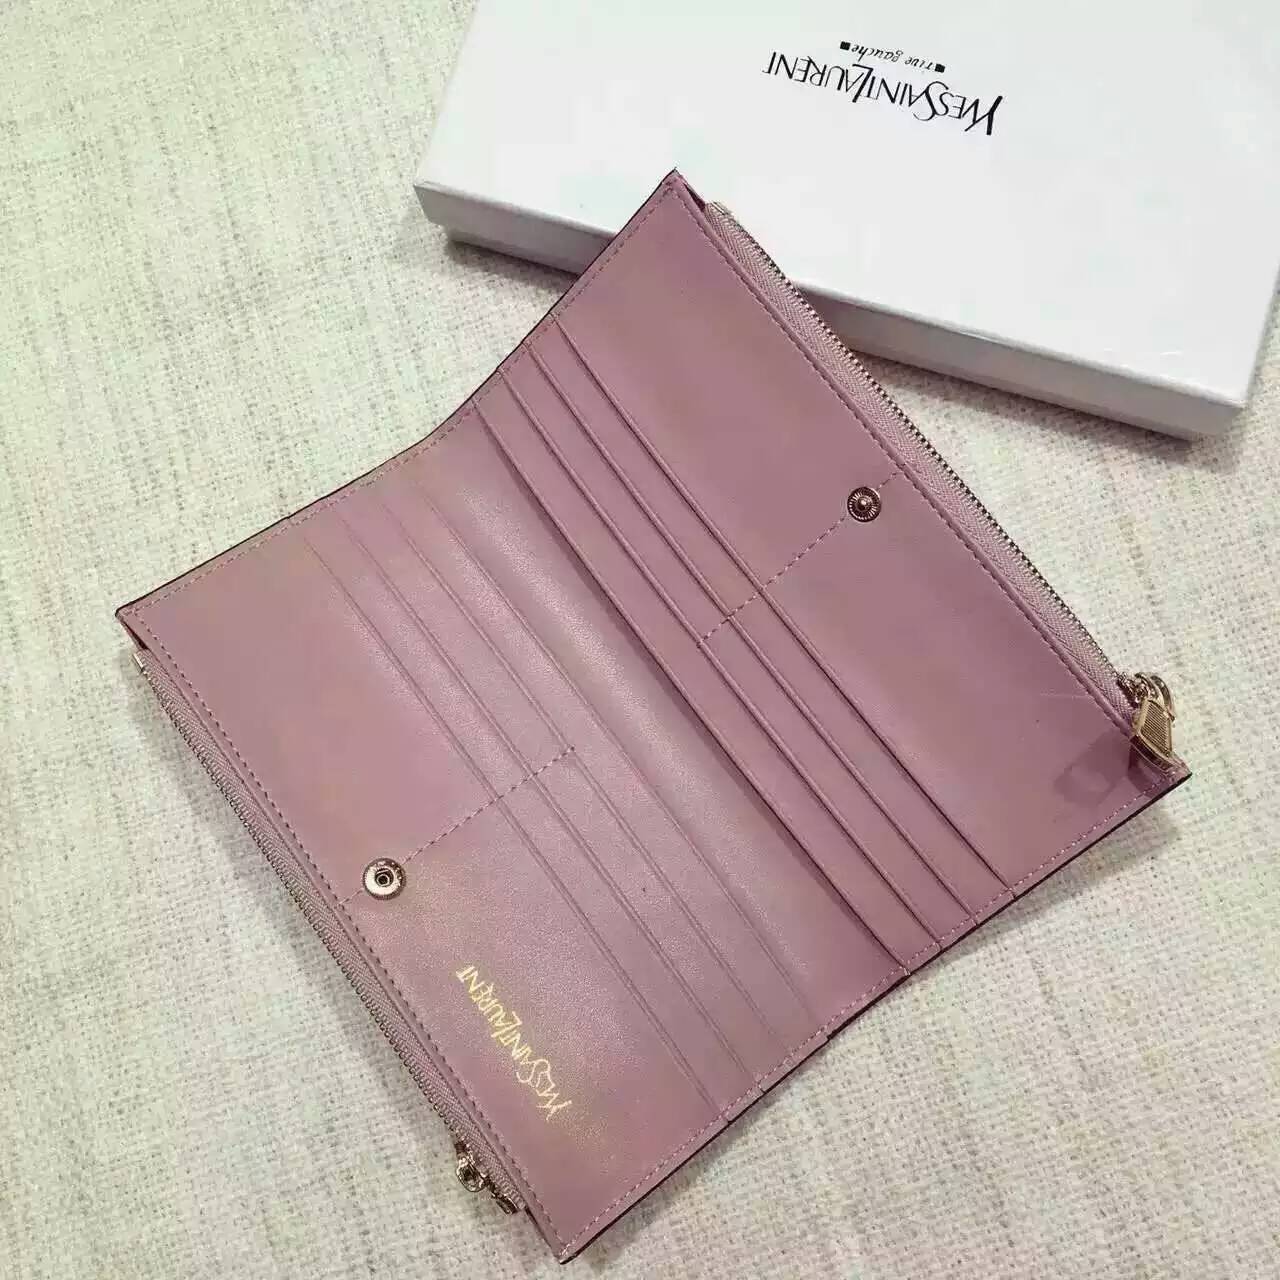 Limited Edition!2016 New Saint Laurent Small Leather Goods Cheap Sale-Saint Laurent Zippy Wallet in Pink Python Embossed Leather - Click Image to Close